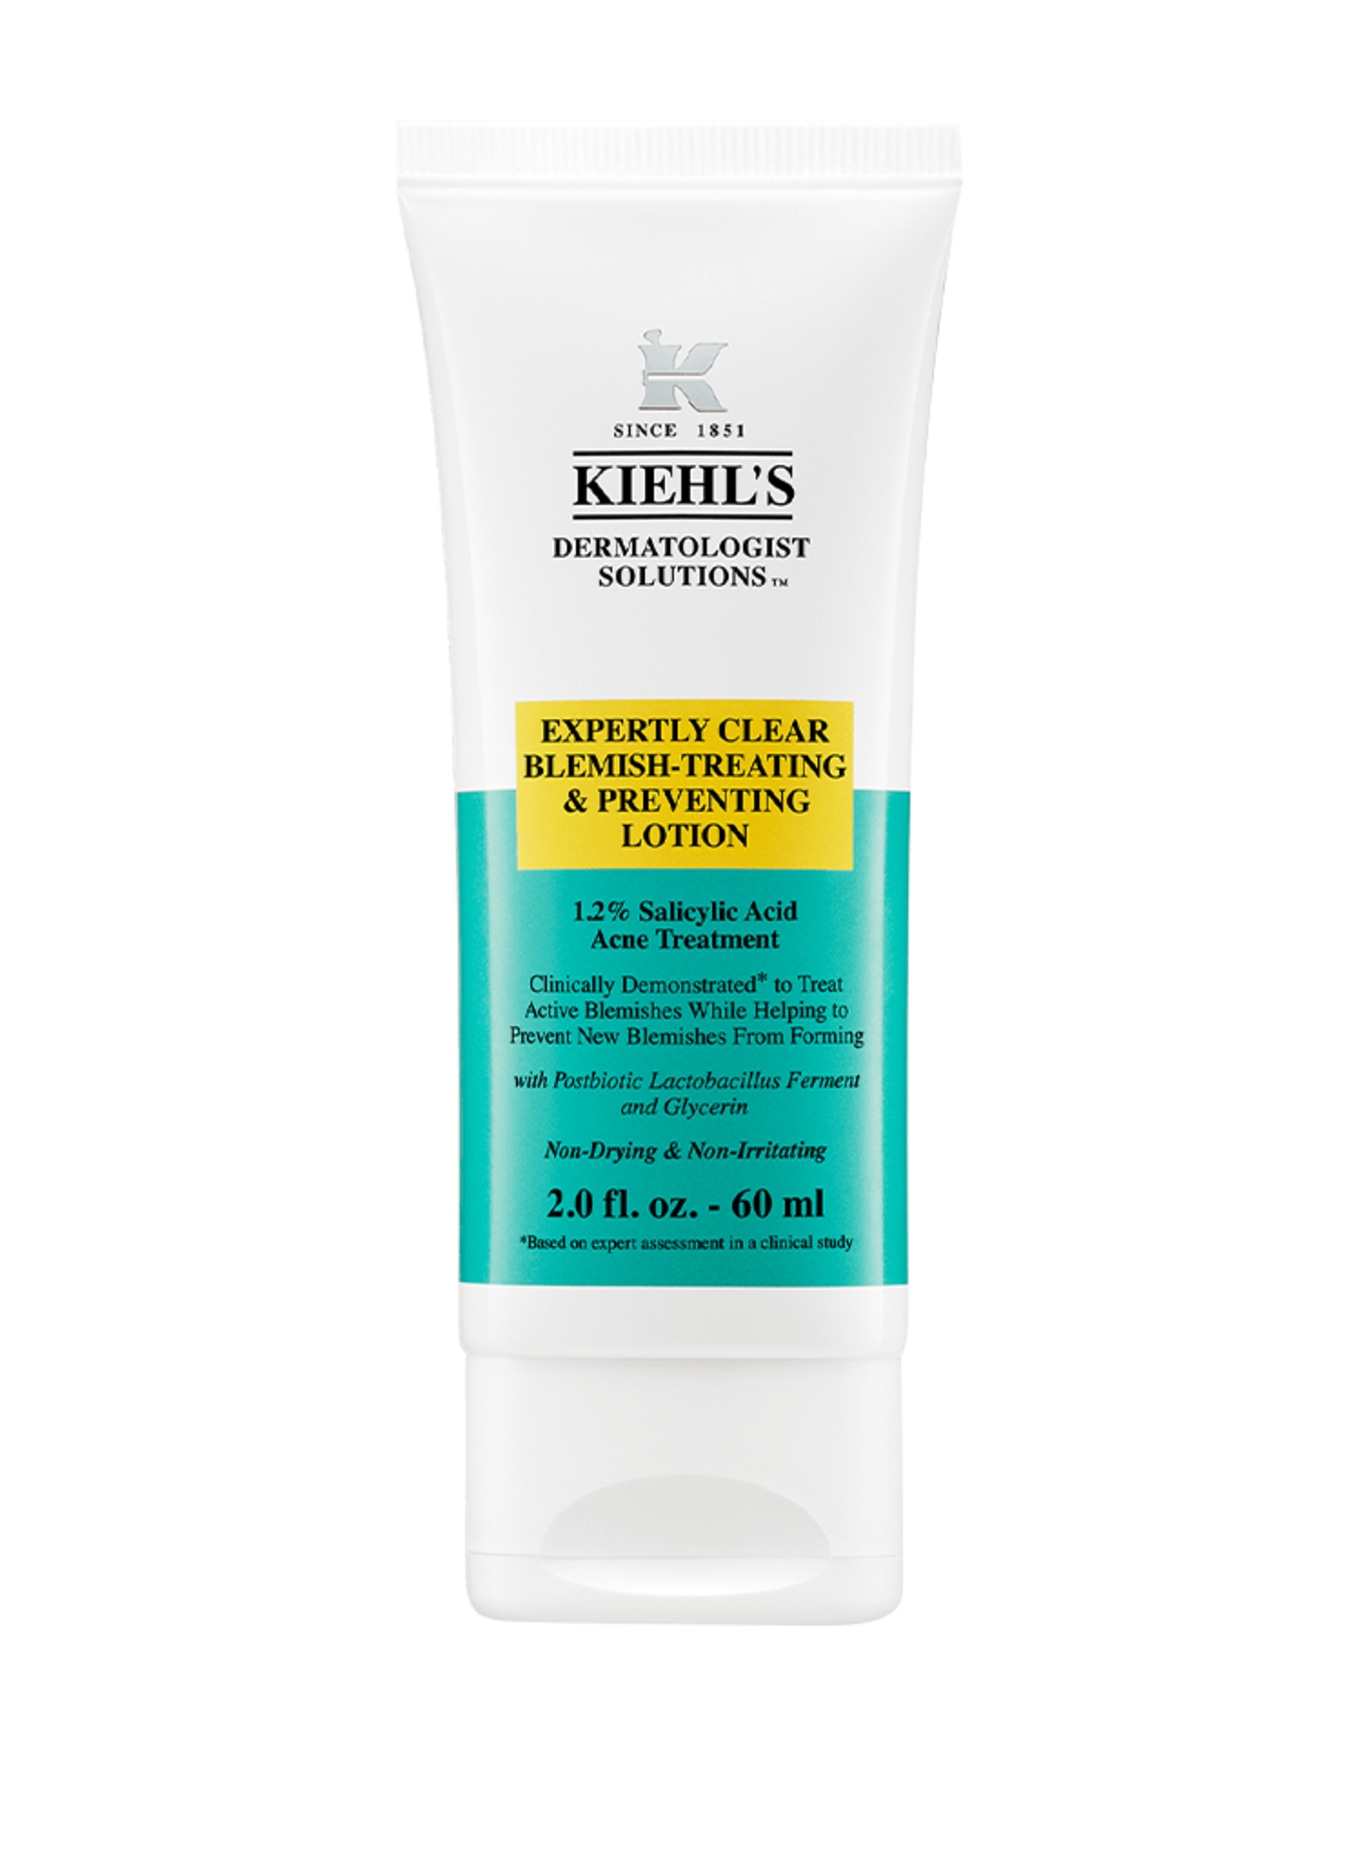 Kiehl's EXPERTLY CLEAR BLEMISH TREATING & PREVENTING LOTION (Obrazek 1)